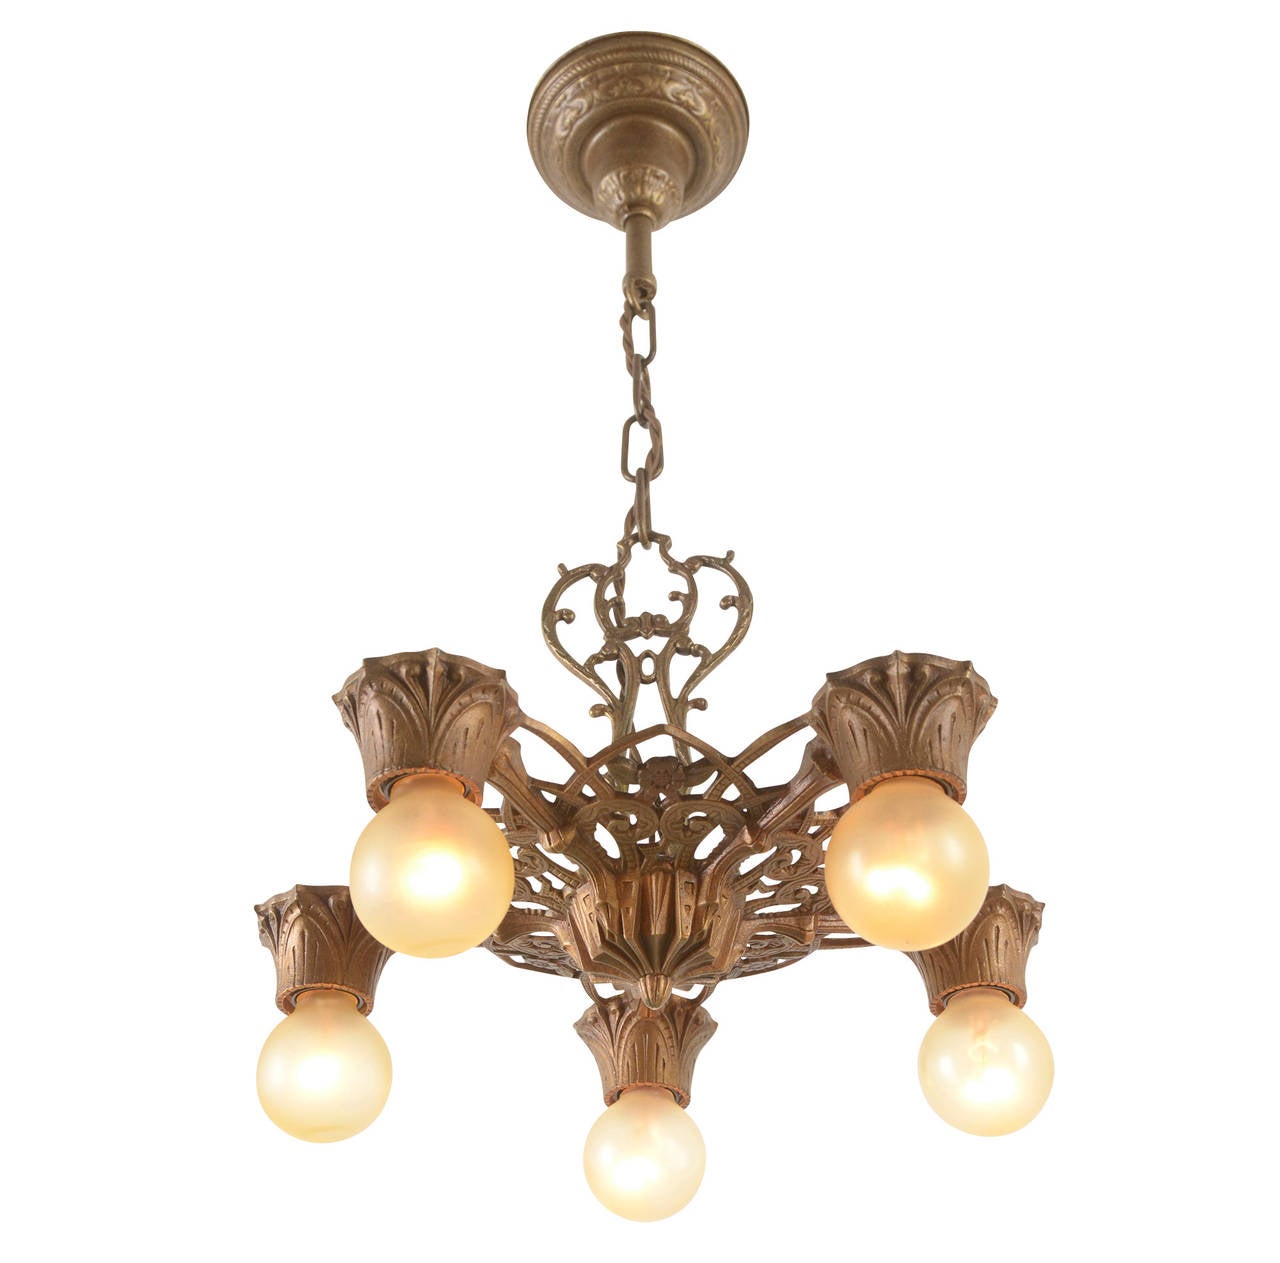 The late-1920s saw an explosion in the popularity of decorative cast white-metal fixtures with exposed globe bulbs and rich polychrome finishes like this example. Undeniably and unabashedly decorative, this fixture enhances its finely cast details